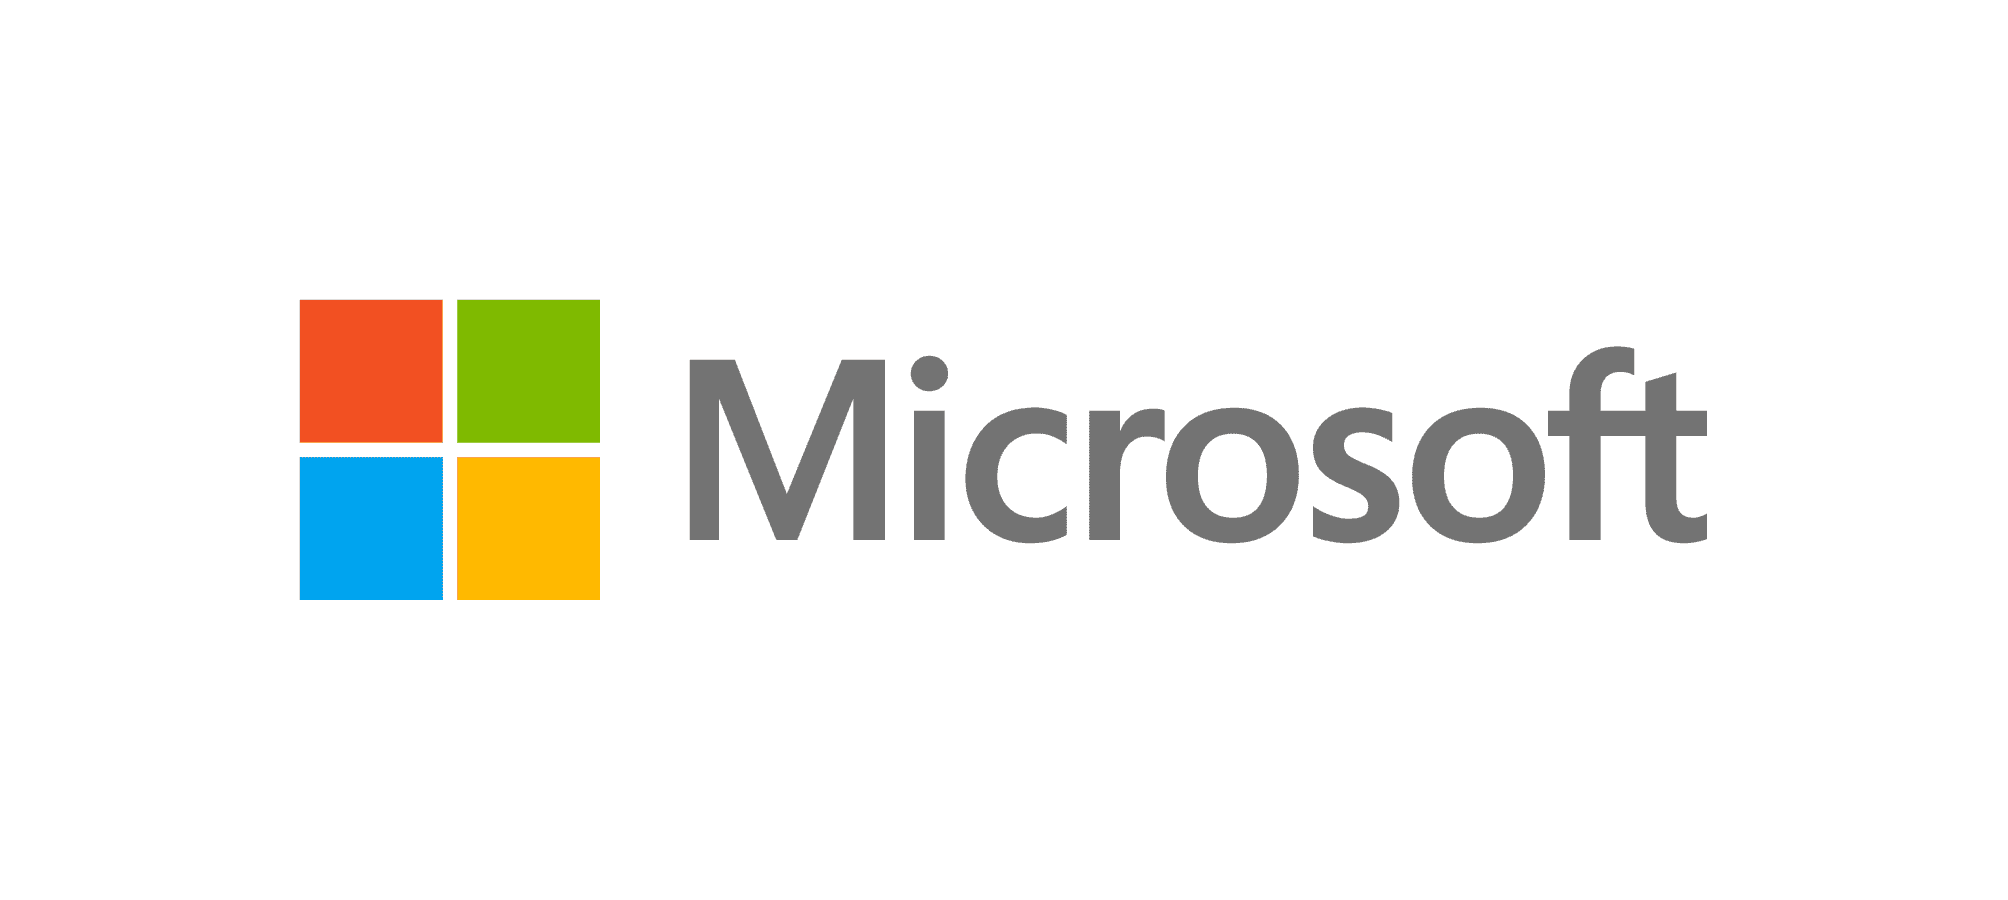 Microsoft’s September Patch Tuesday resolves 63 vulnerabilities with one actively exploited zero-day